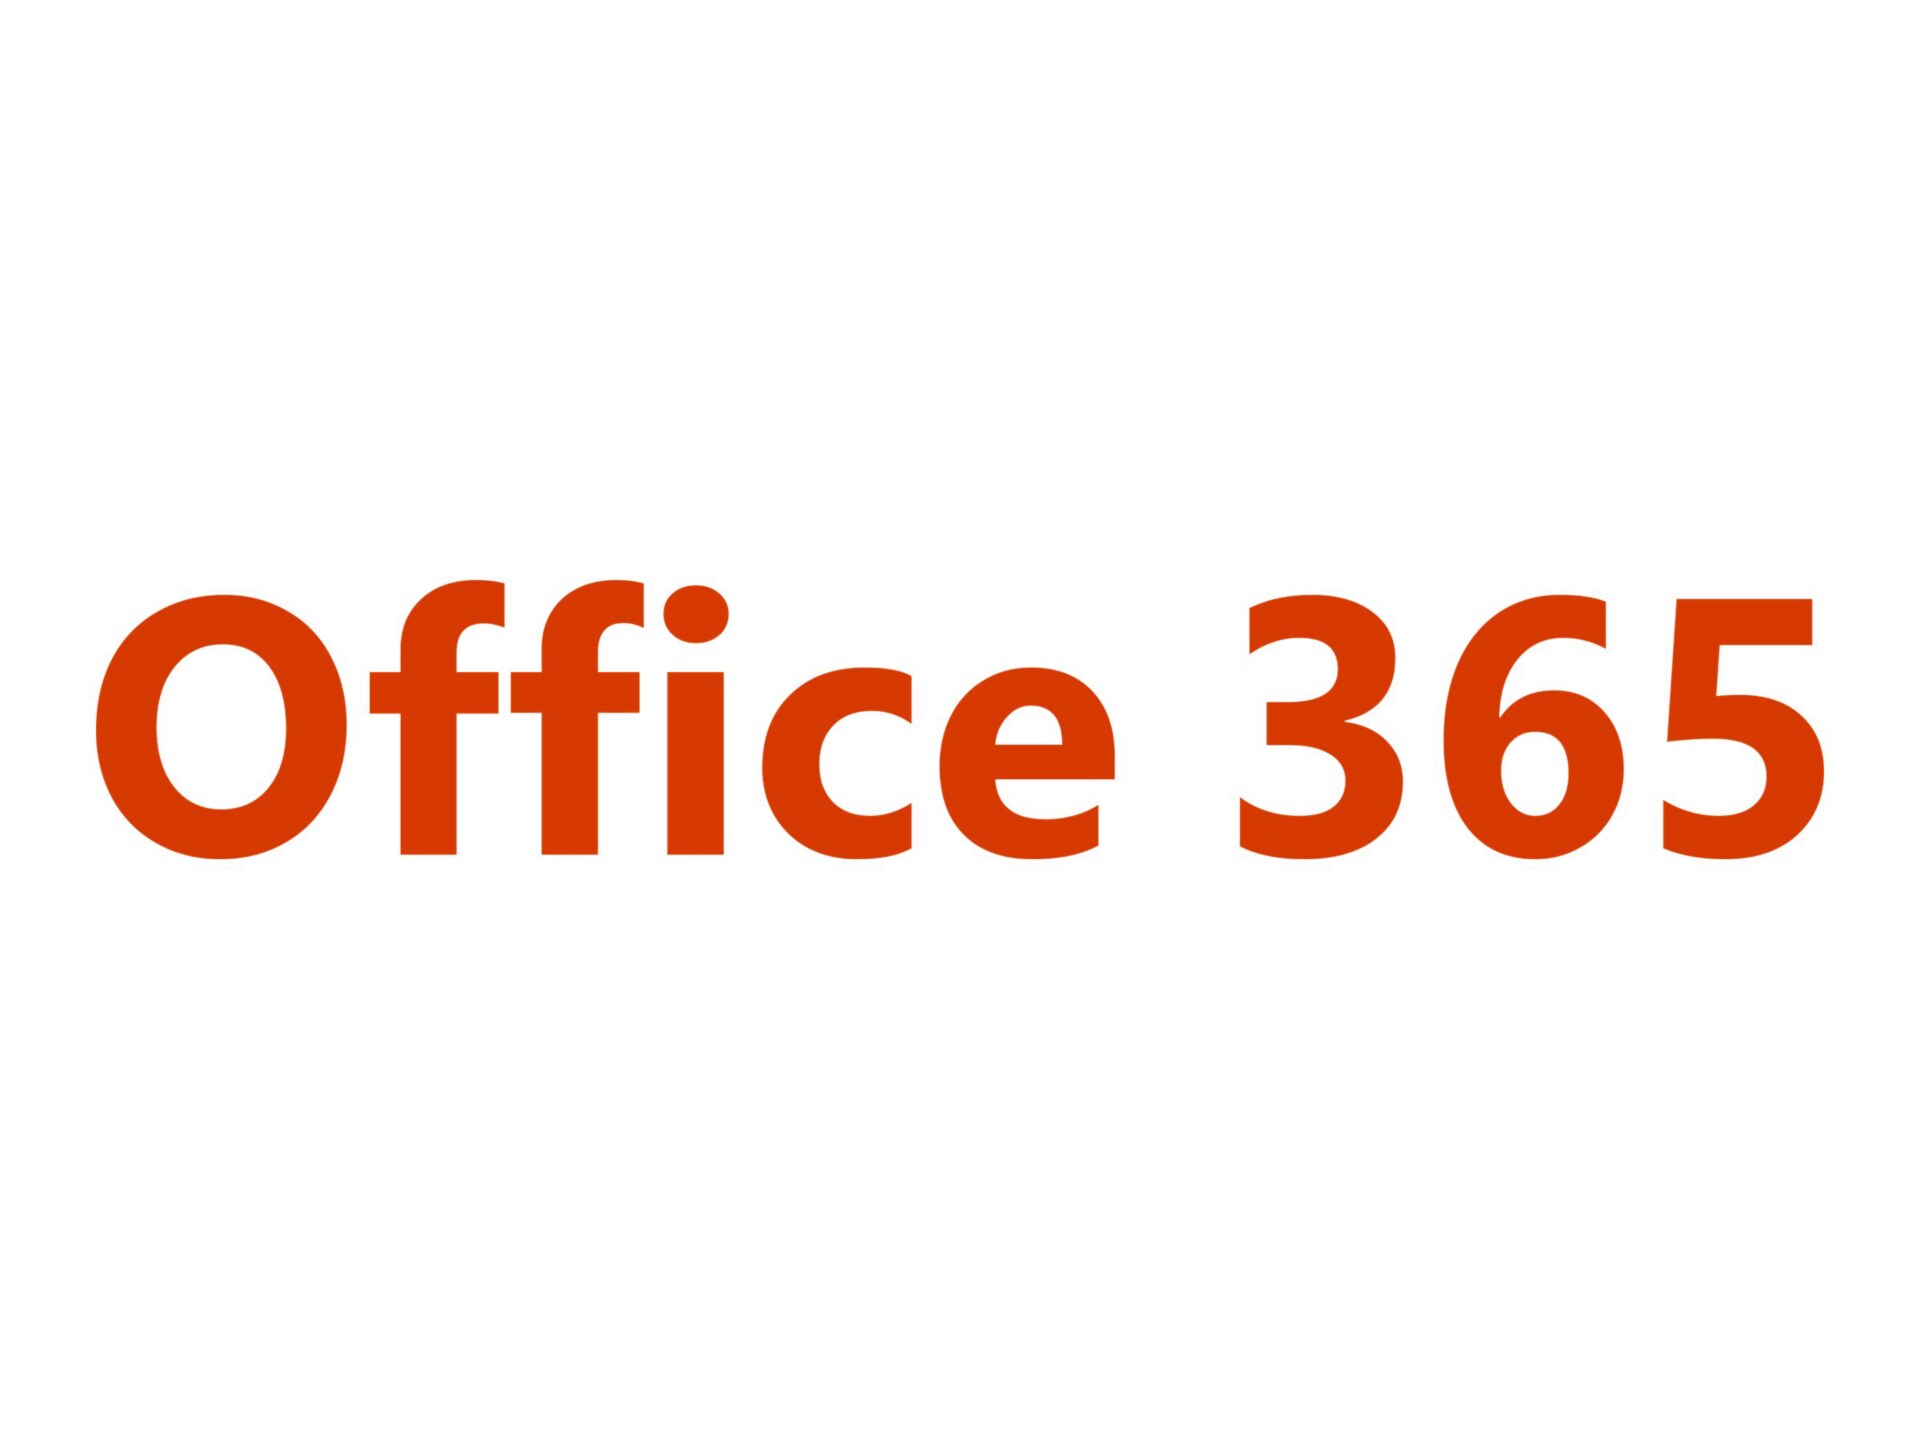 MS MPSAB OFFICE 365 ADVED ADD